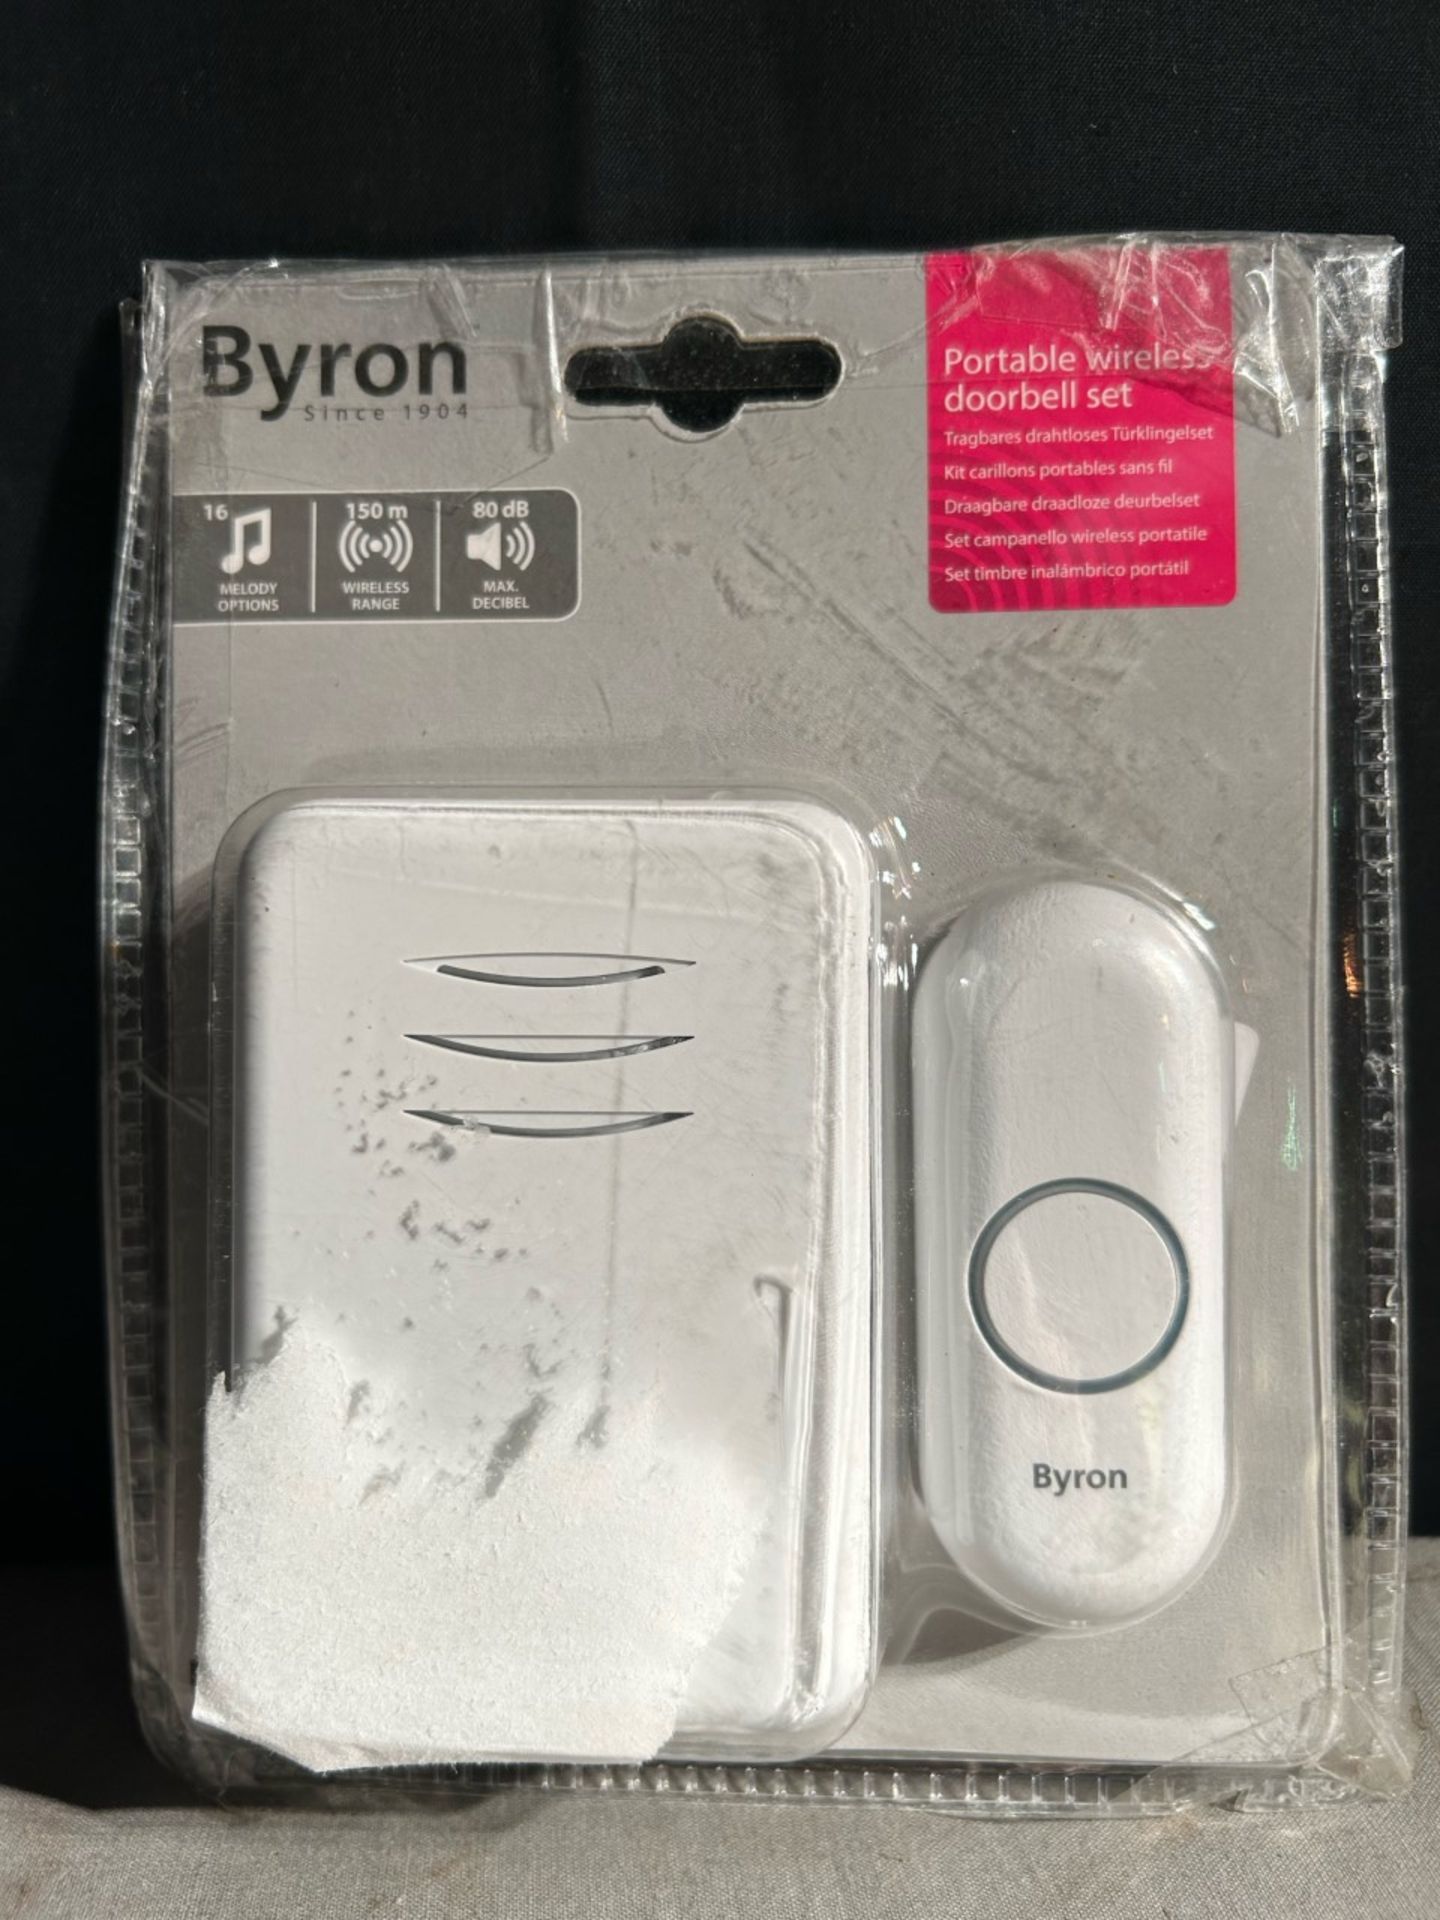 Byron portable wireless doorbell set. Untested - Image 2 of 2